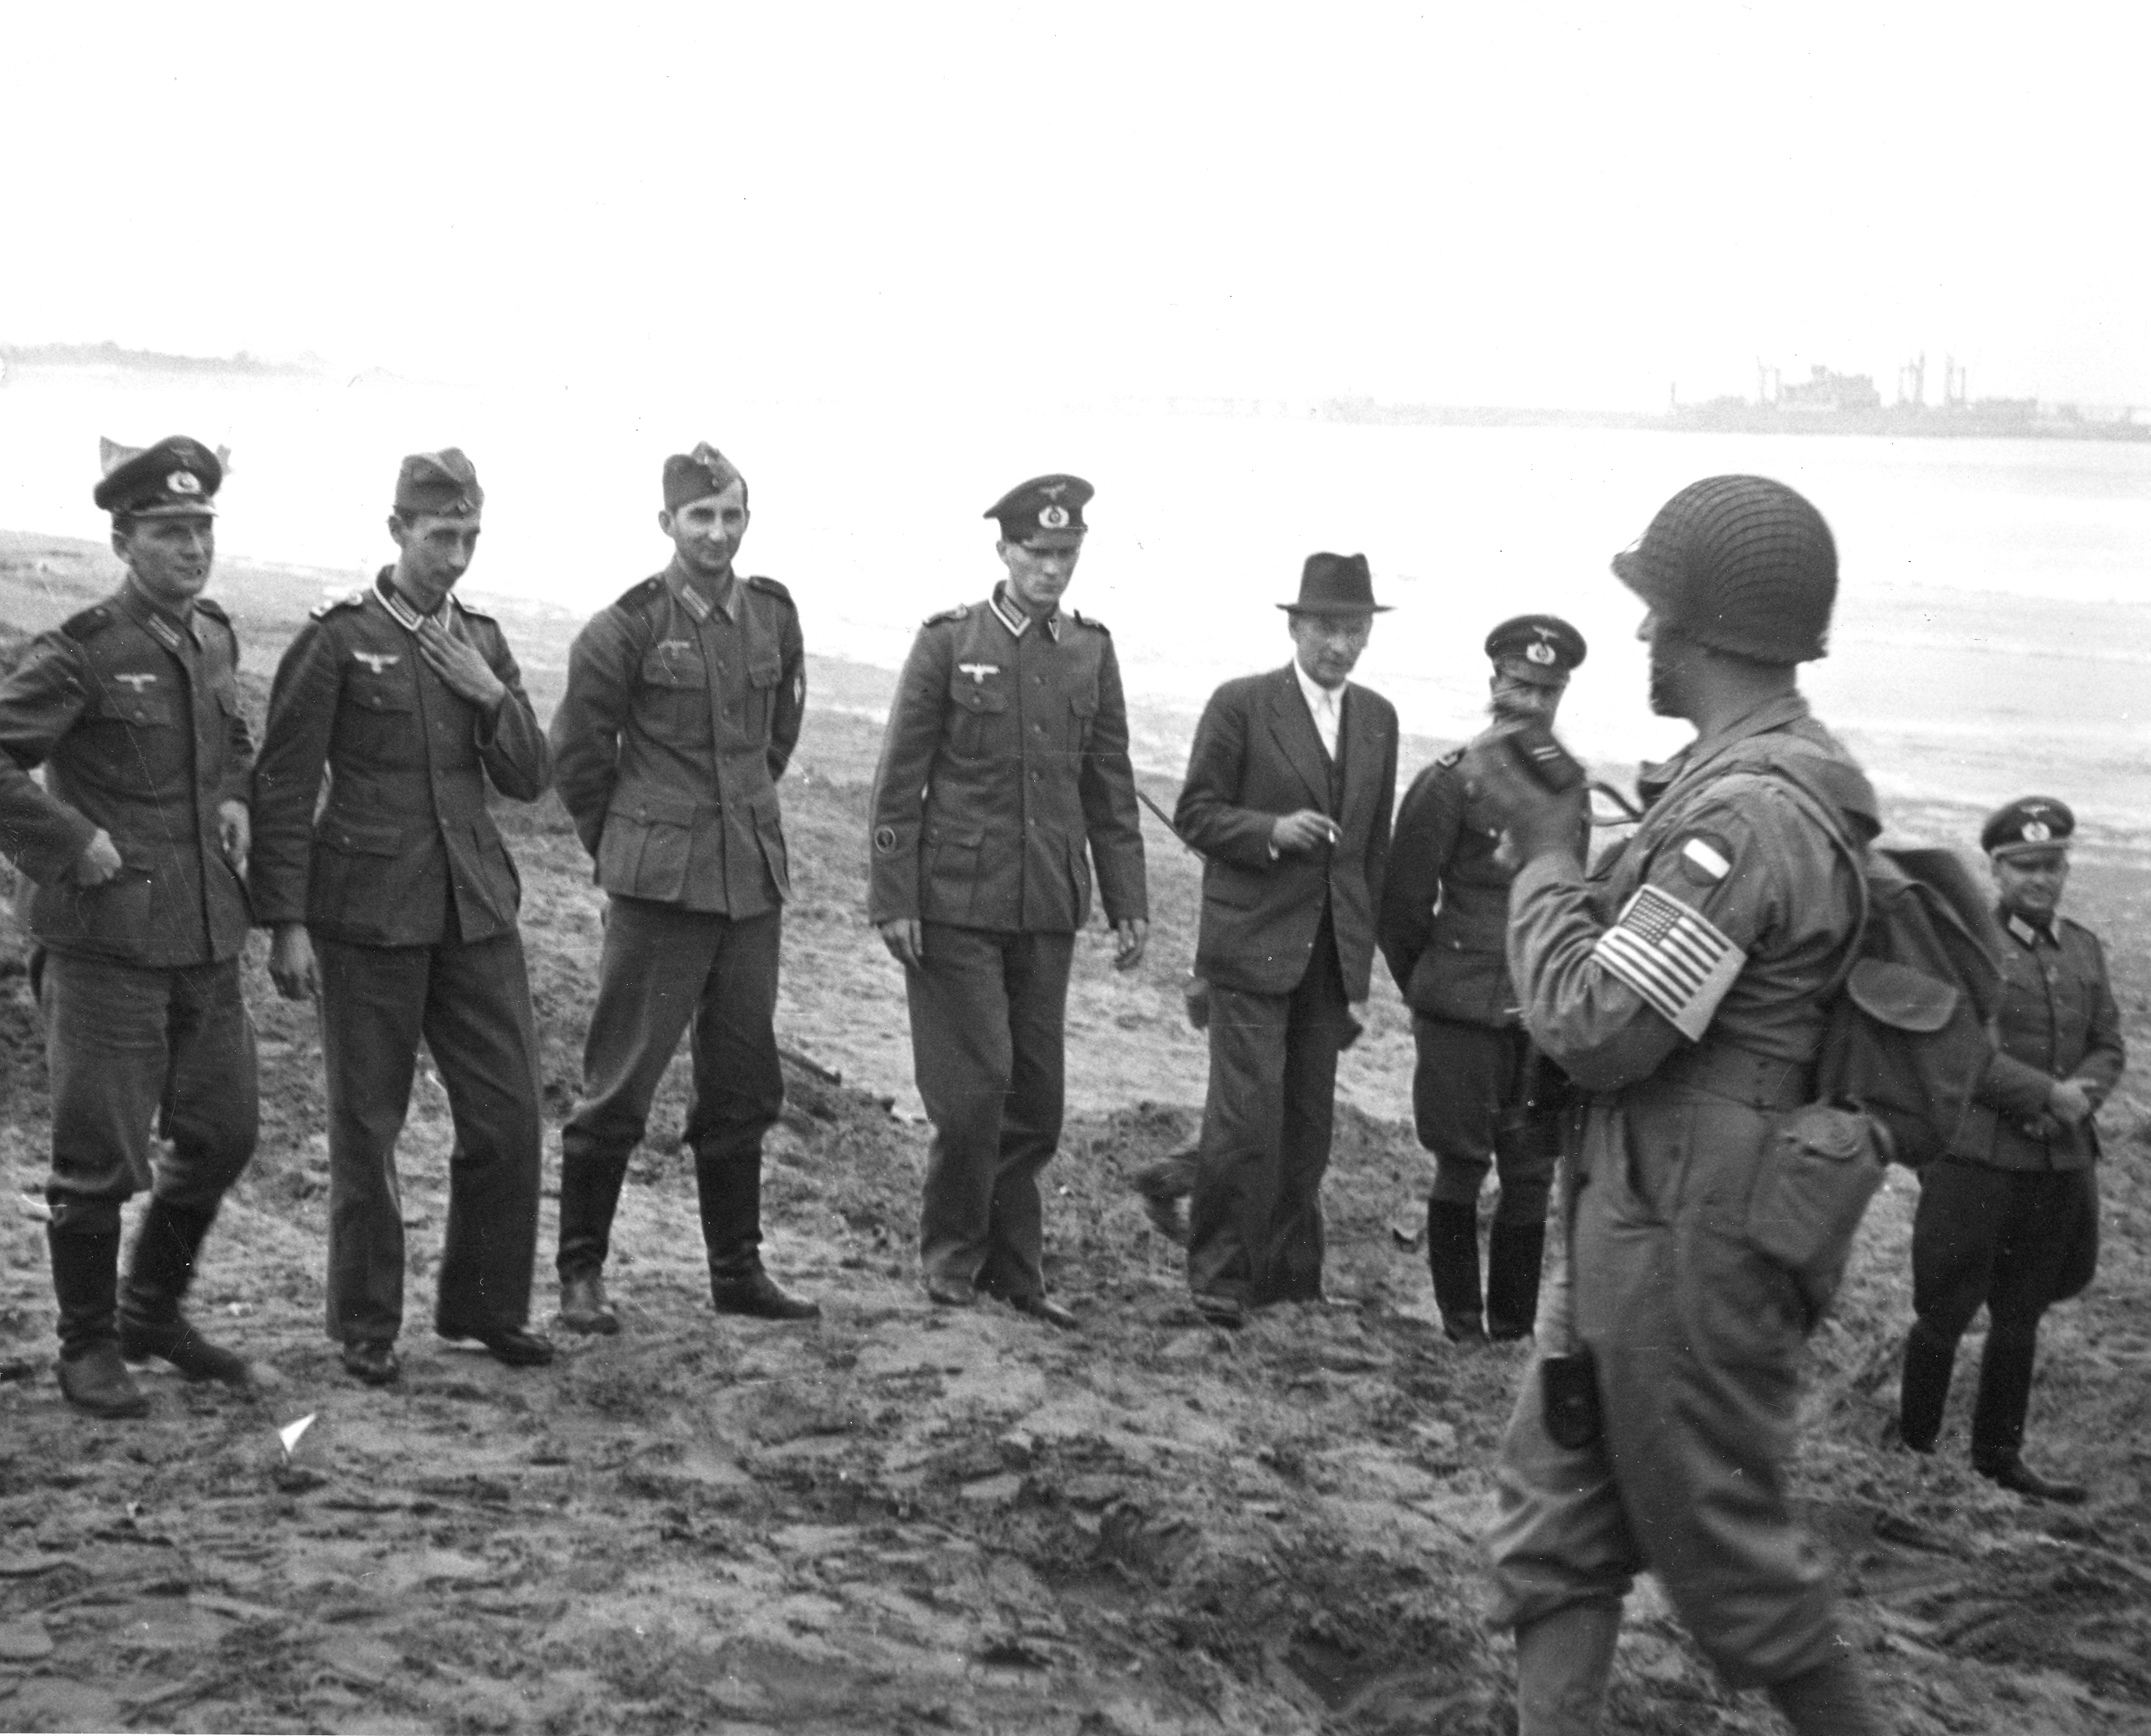 United States Army Lt Robert Longini photographing German prisoners of war captured during Operation Torch at Fedala, French Morocco (now Mohammedia, Morocco), Nov 1942.